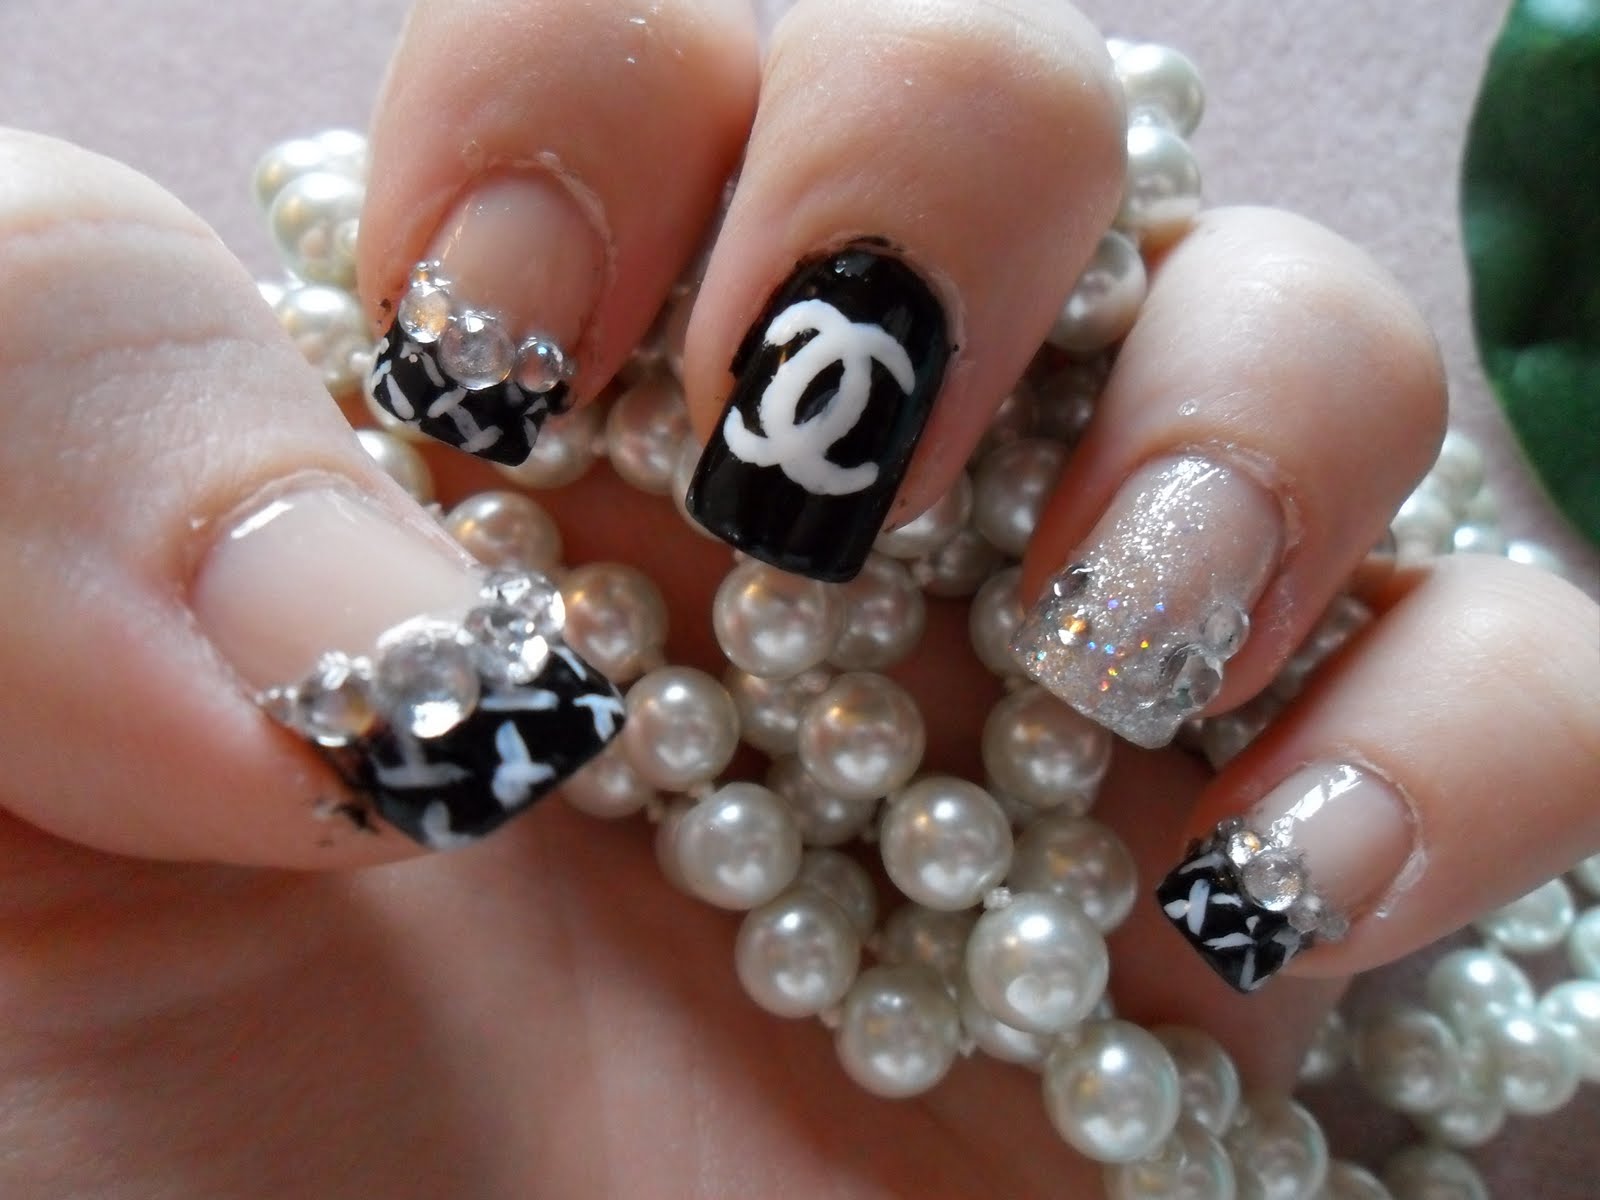 8. Dripping Chanel Nail Art Designs - wide 6